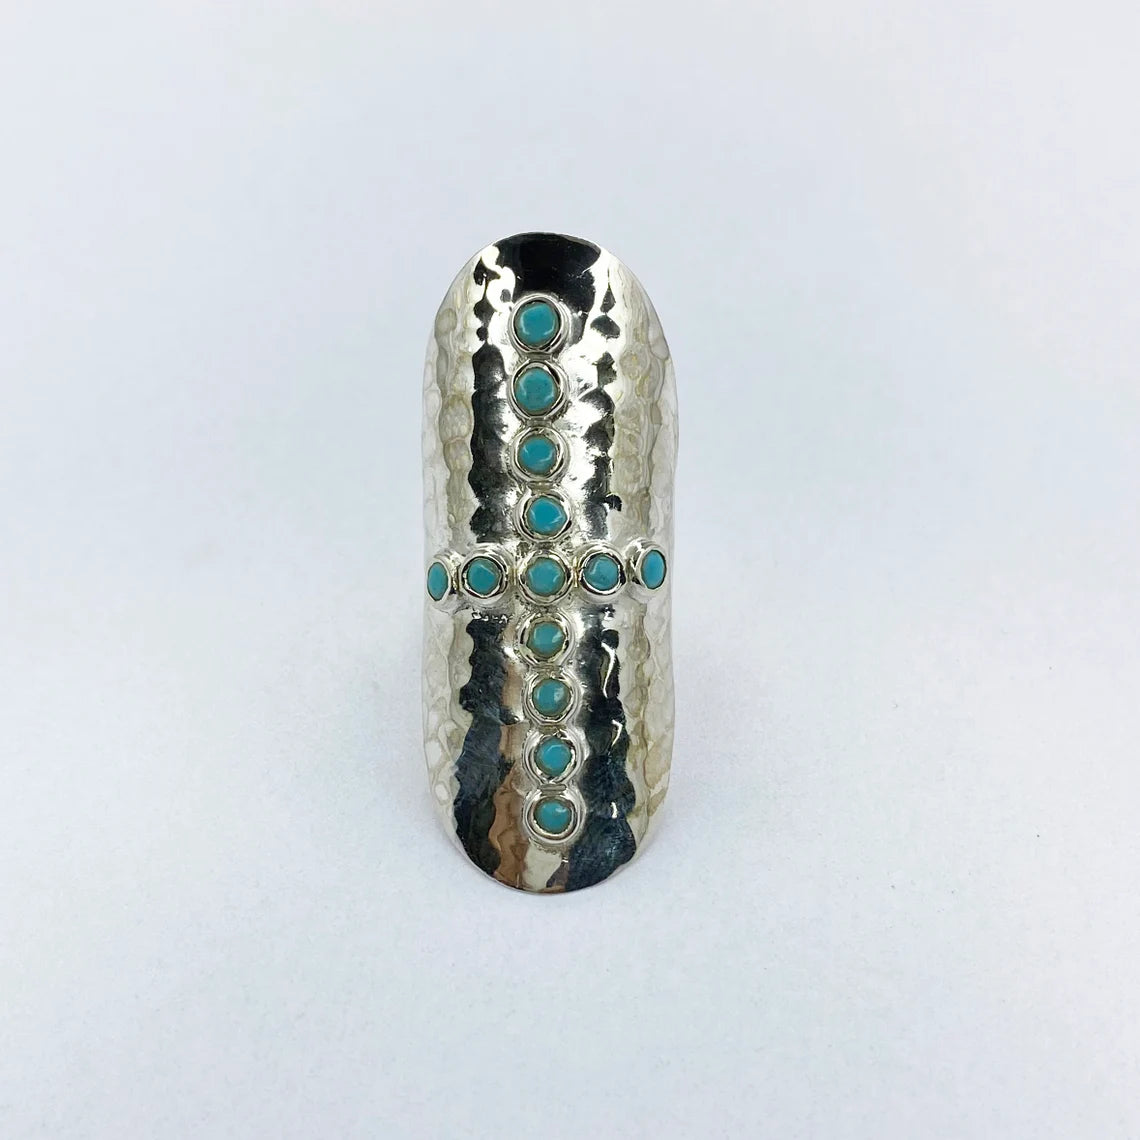 Extremely Large and Original Silver Bohemian Ring, Turquoise Cross Ring, Turquoise Cross 925 Sterling Silver Rii